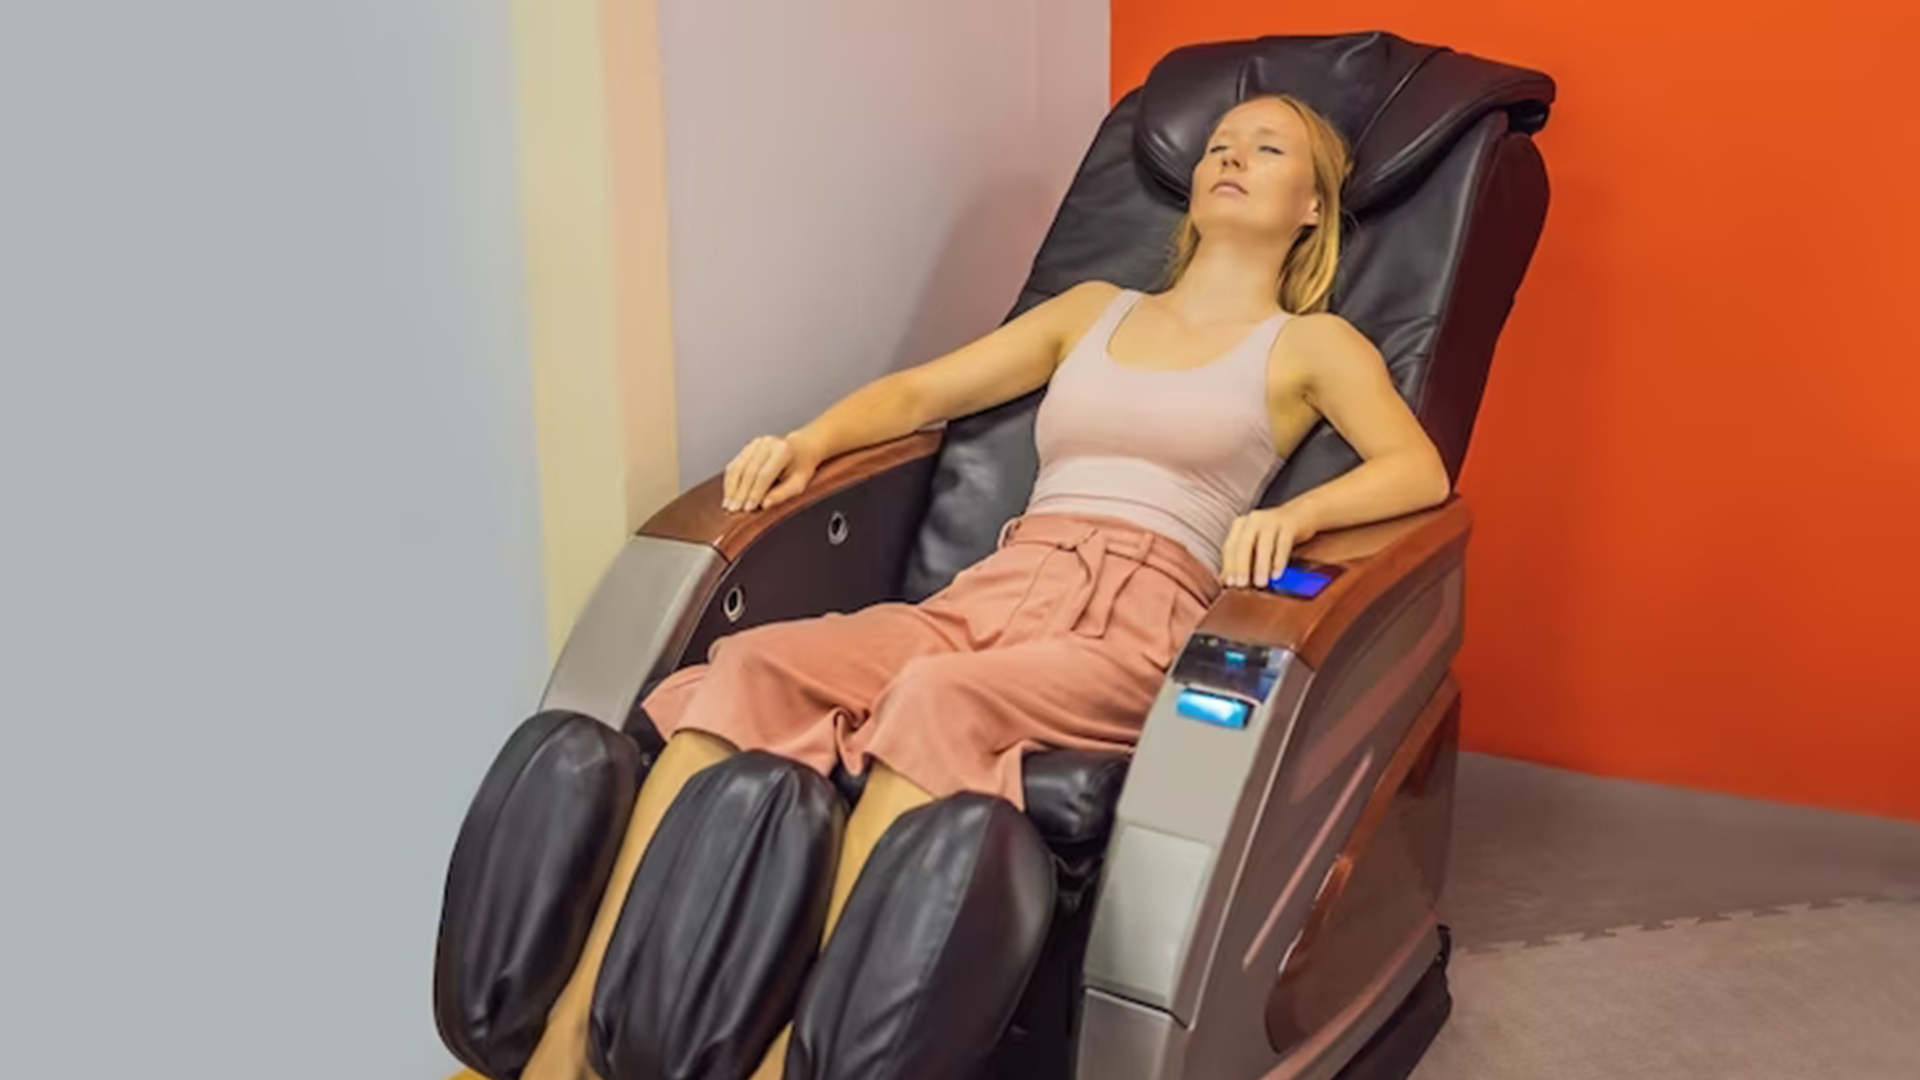 Massage chairs provide physical and mental well-being